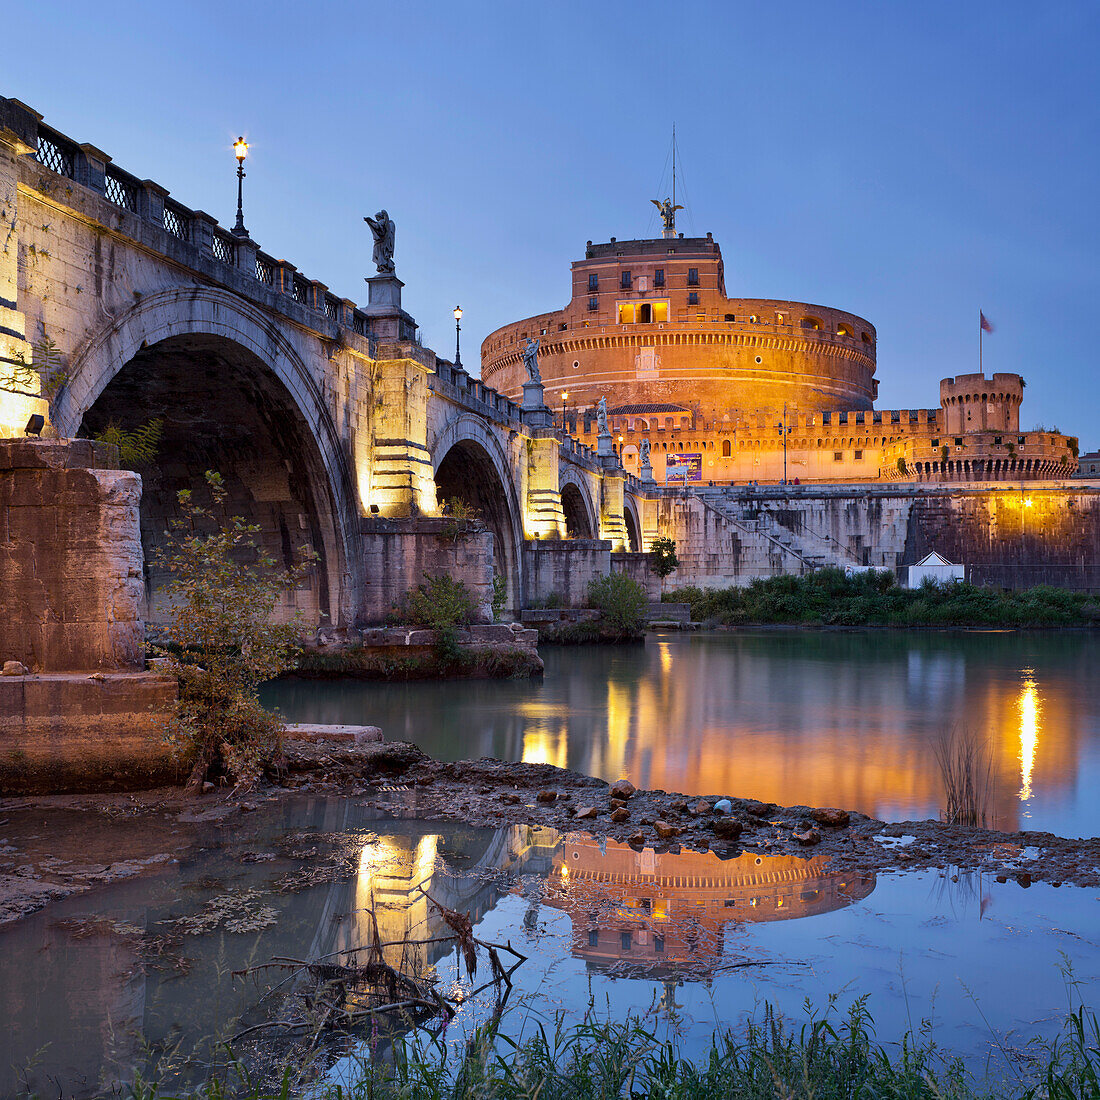 Castel Sant'Angelo, Mausoleum of Hadrian with Ponte Sant'Angelo, Bridge of Hadrian, Tiber, Rome, Lazio, Italy